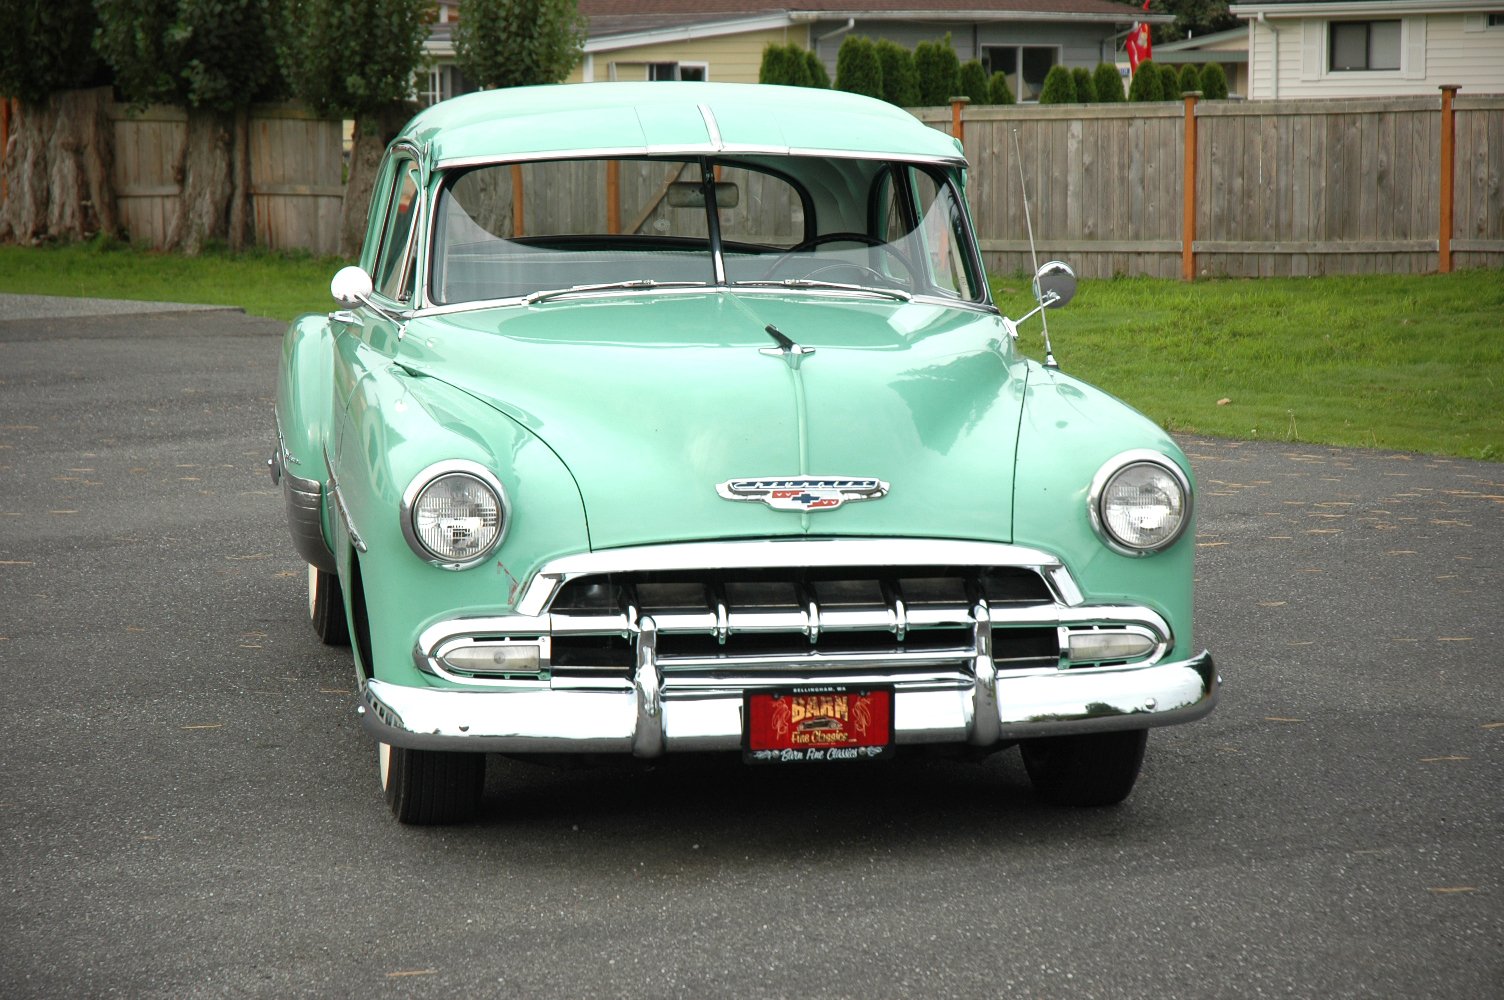 1952, Chevrolet, Fleetmaster, Deluxe, Coupe, Classic, Old, Vintage, Usa, 1500x1000 01 Wallpaper